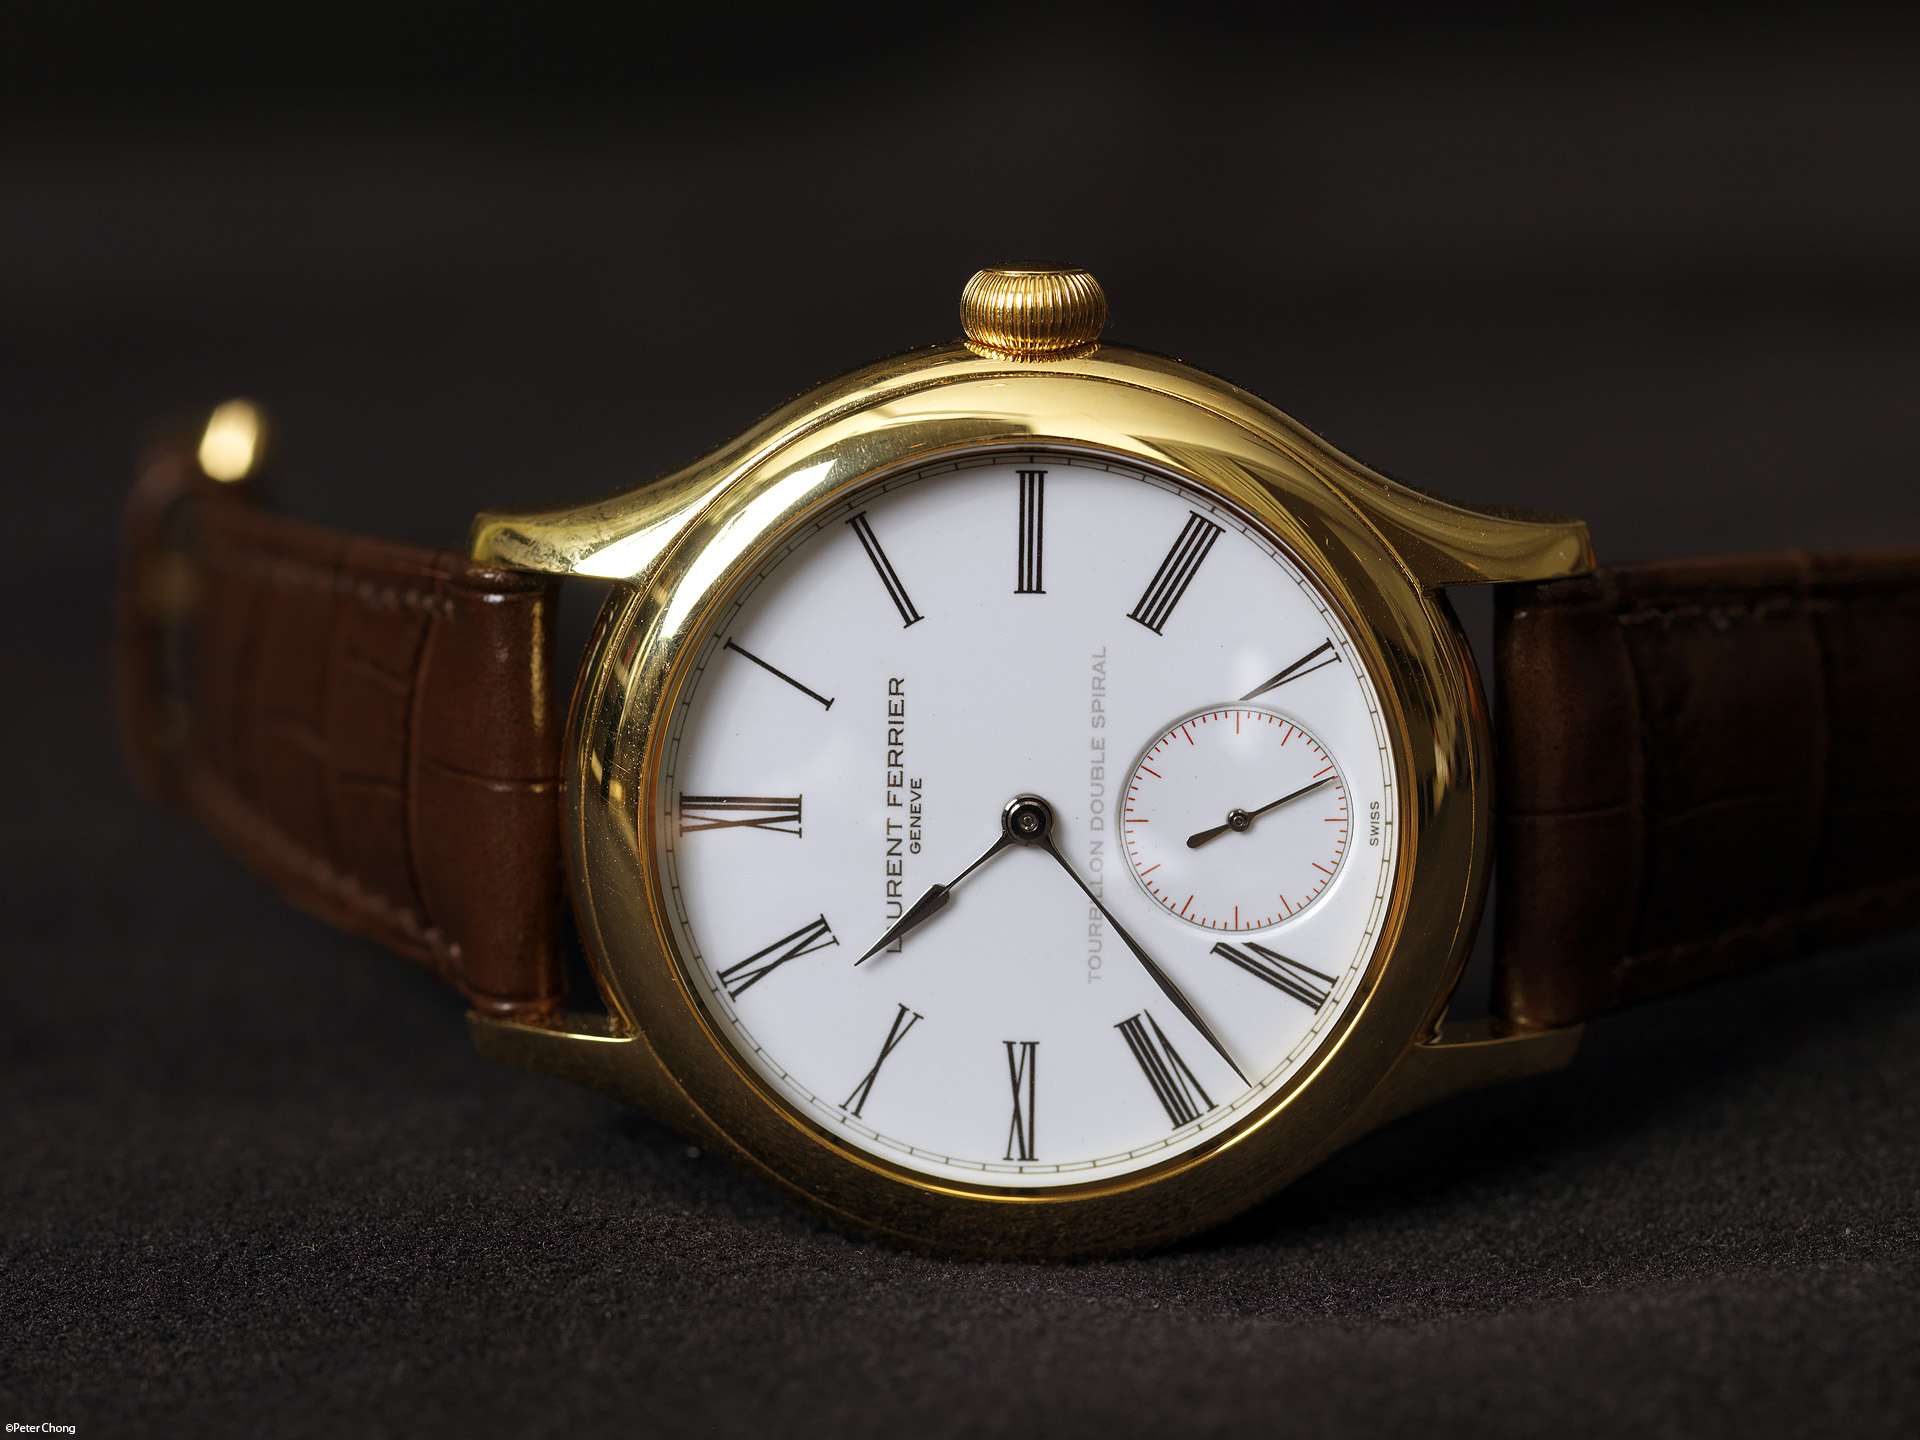 The Laurent Ferrier Gallet Tourbillon. A very simple and elegant looking dress watch.